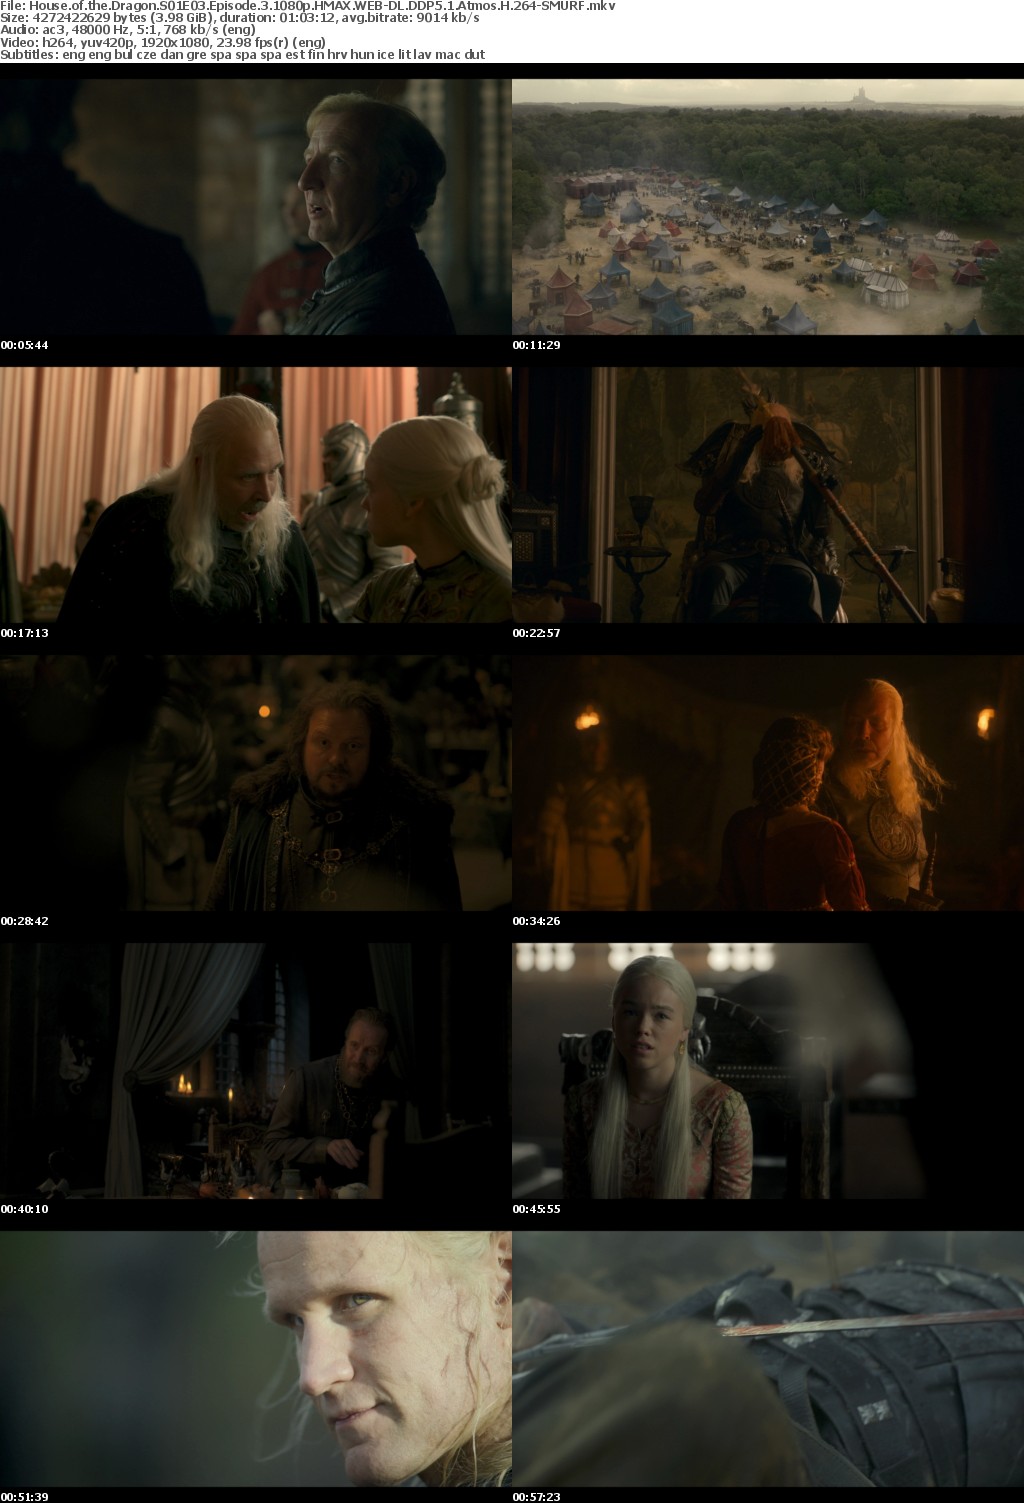 House of the Dragon S01E03 Episode 3 1080p HMAX WEB-DL DDP5 1 Atmos H 264-SMURF